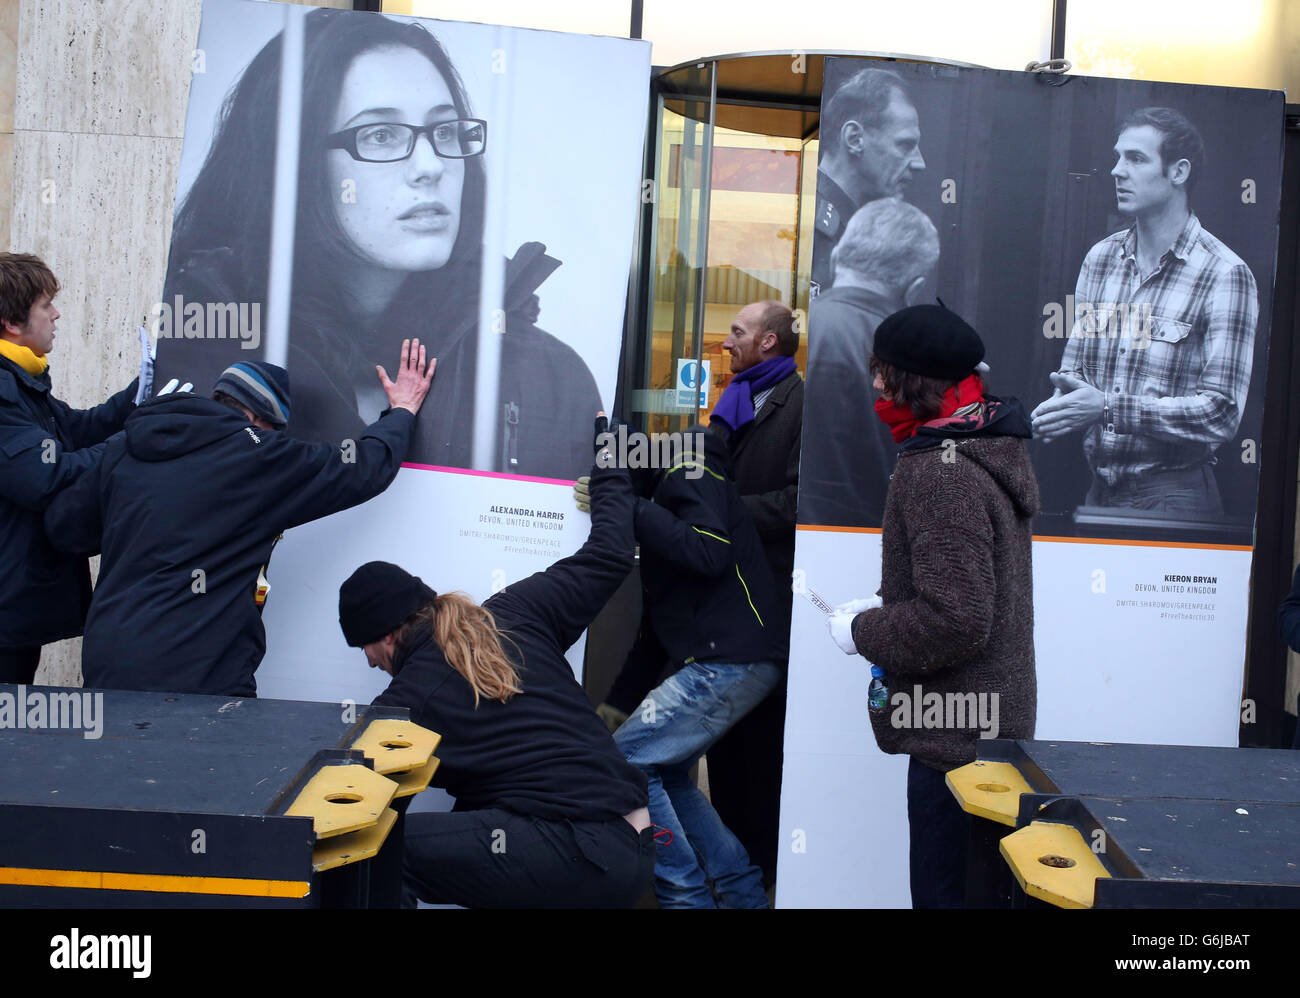 Greenpeace demonstrators move photographs of Alexandra Harris and Kieron Bryan as they set up an exhibition entitled 'Thirty Acts of Courage' featuring giant portraits of the activists arrested in Russia as part of the group's continuing campaign against drilling in the Arctic, outside the Shell building on the Southbank, central London. Stock Photo